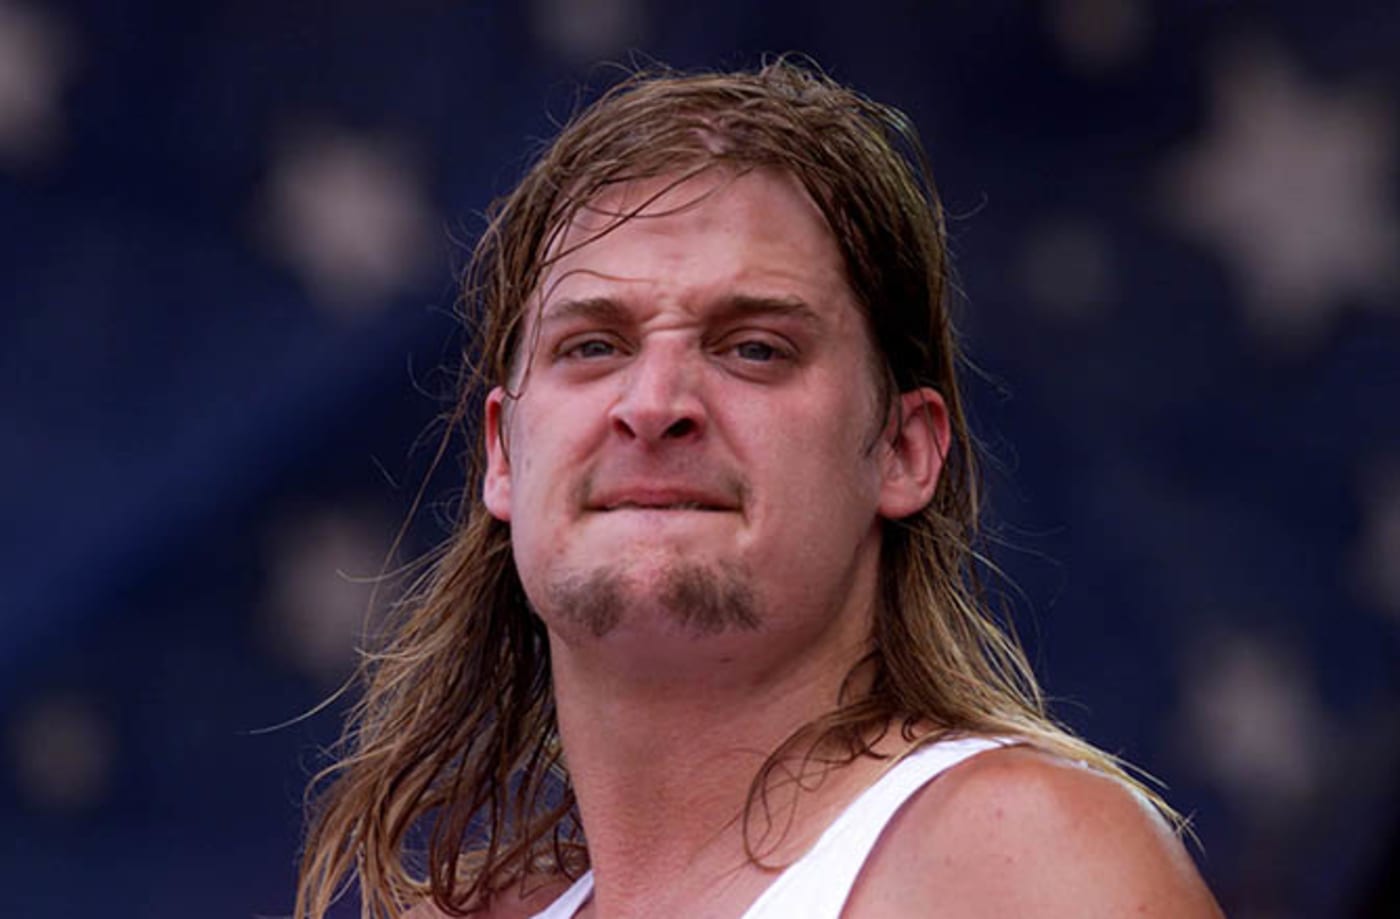 This is a photo of Kid Rock.